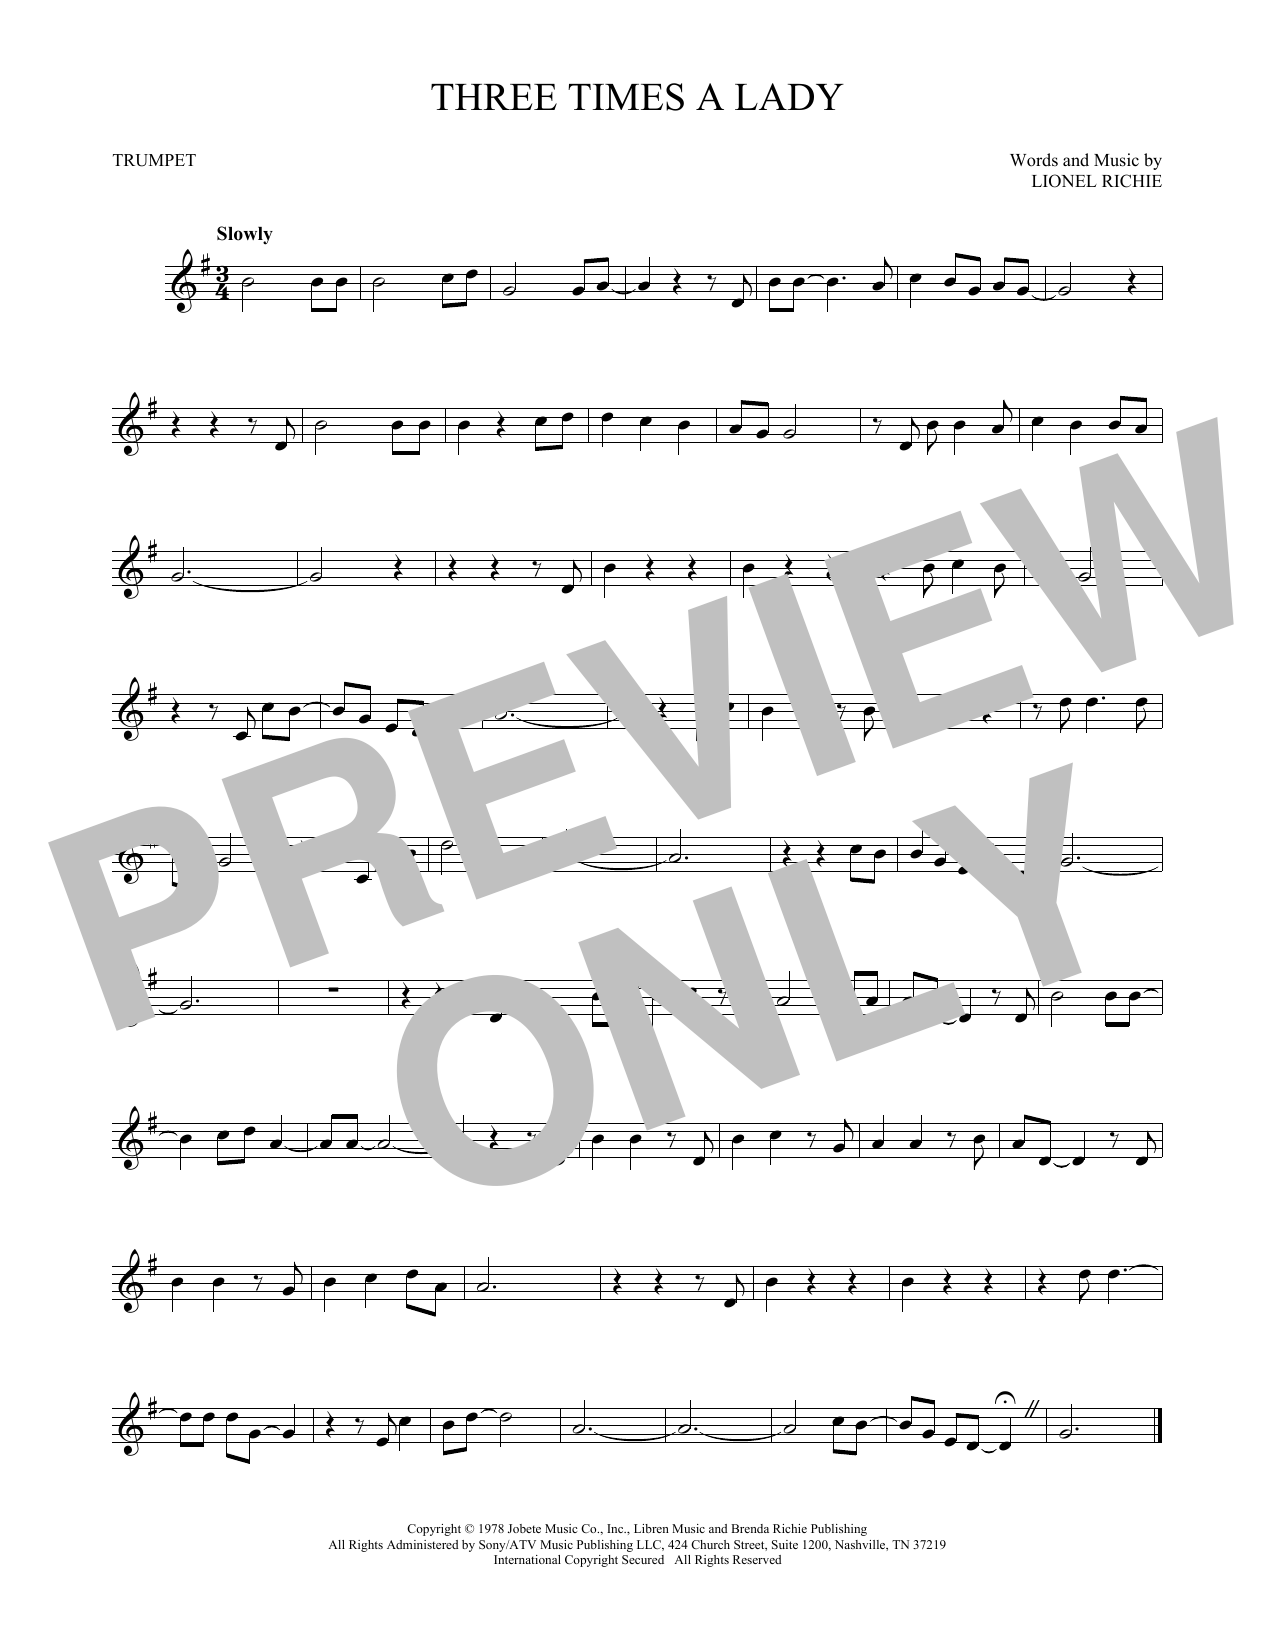 Commodores Three Times A Lady sheet music notes and chords. Download Printable PDF.